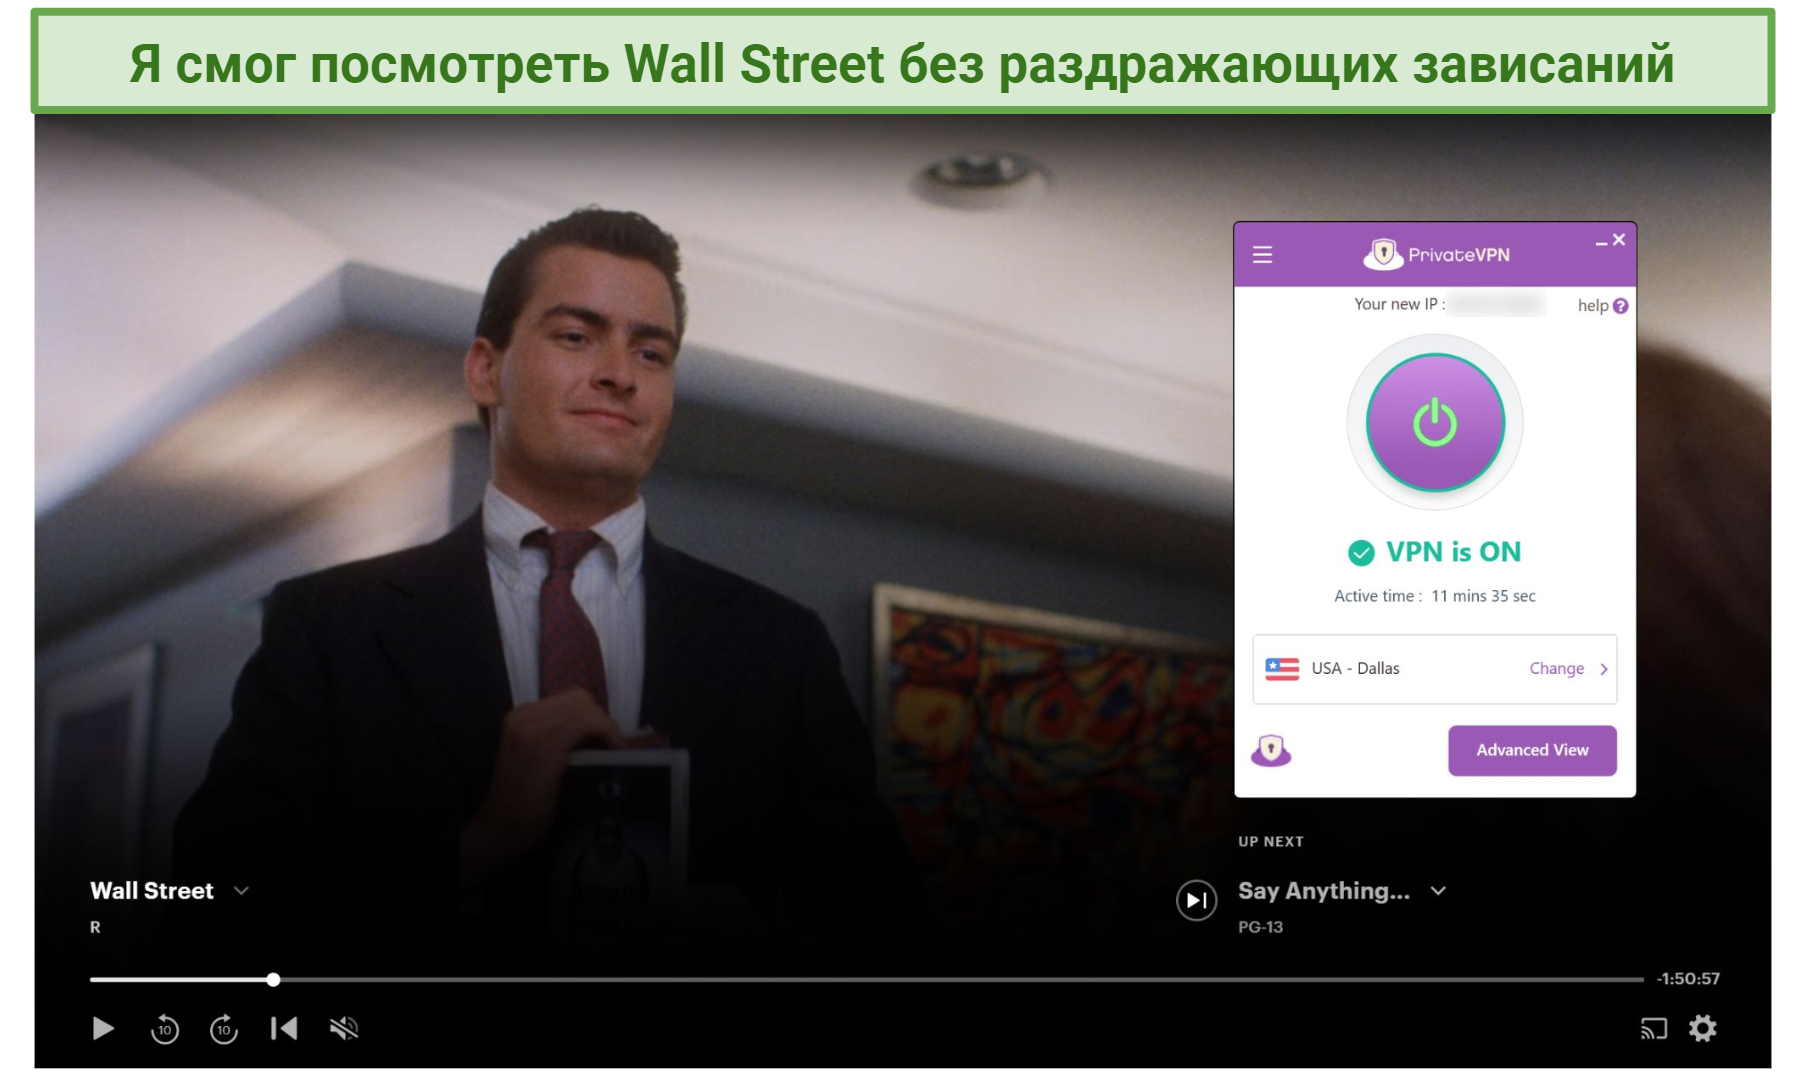 Screenshot of Hulu player streaming Wall Street while connected to PrivateVPN